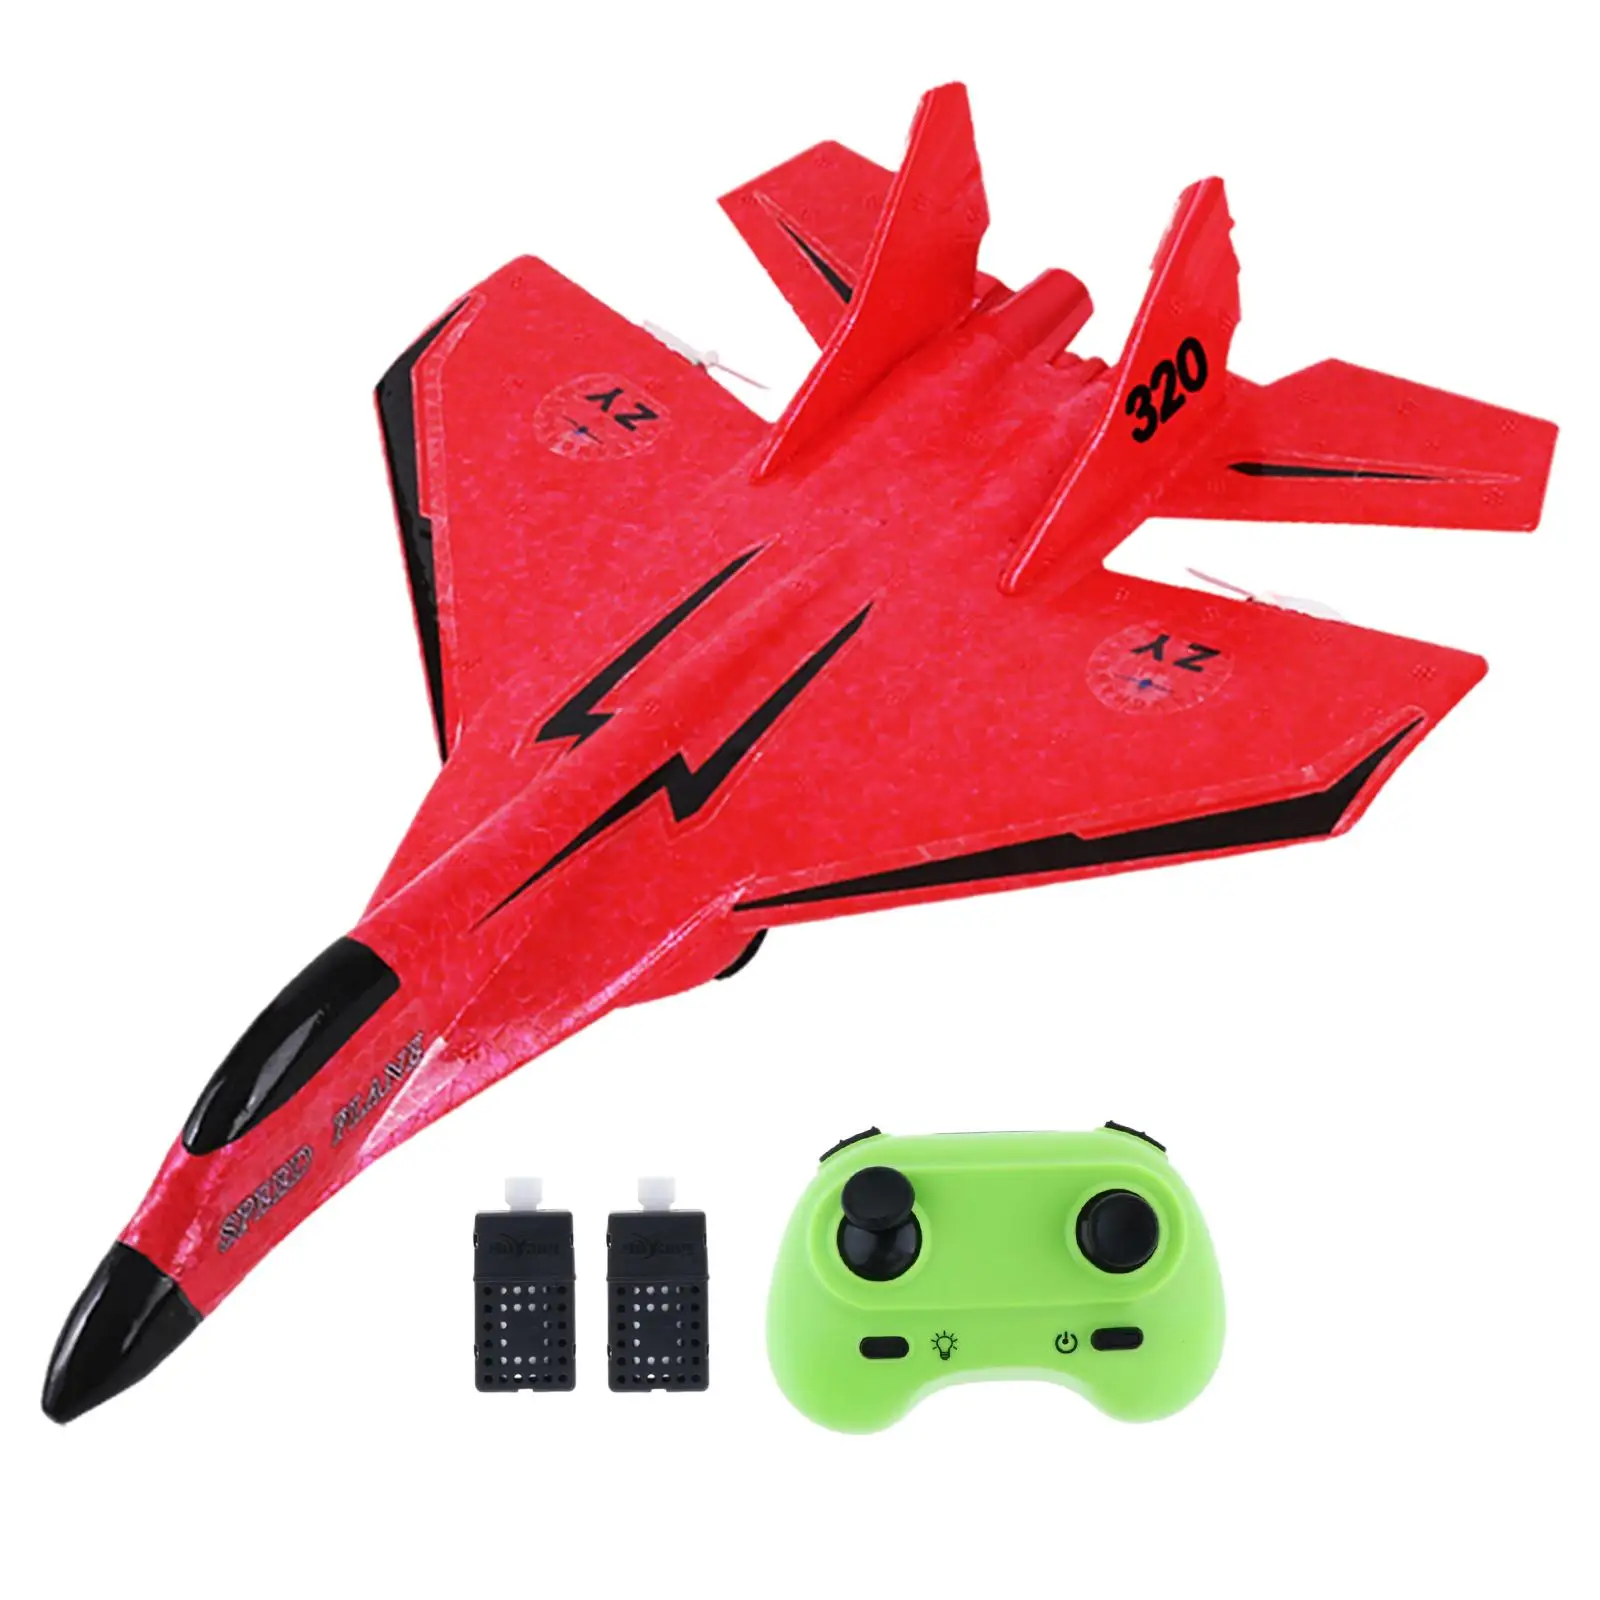 2 CH RC Plane Ready to Fly Outdoor Flighting Toys Gift Easy to Fly Aircraft Jet RC Glider for Boys Girls Kids Adults Beginner